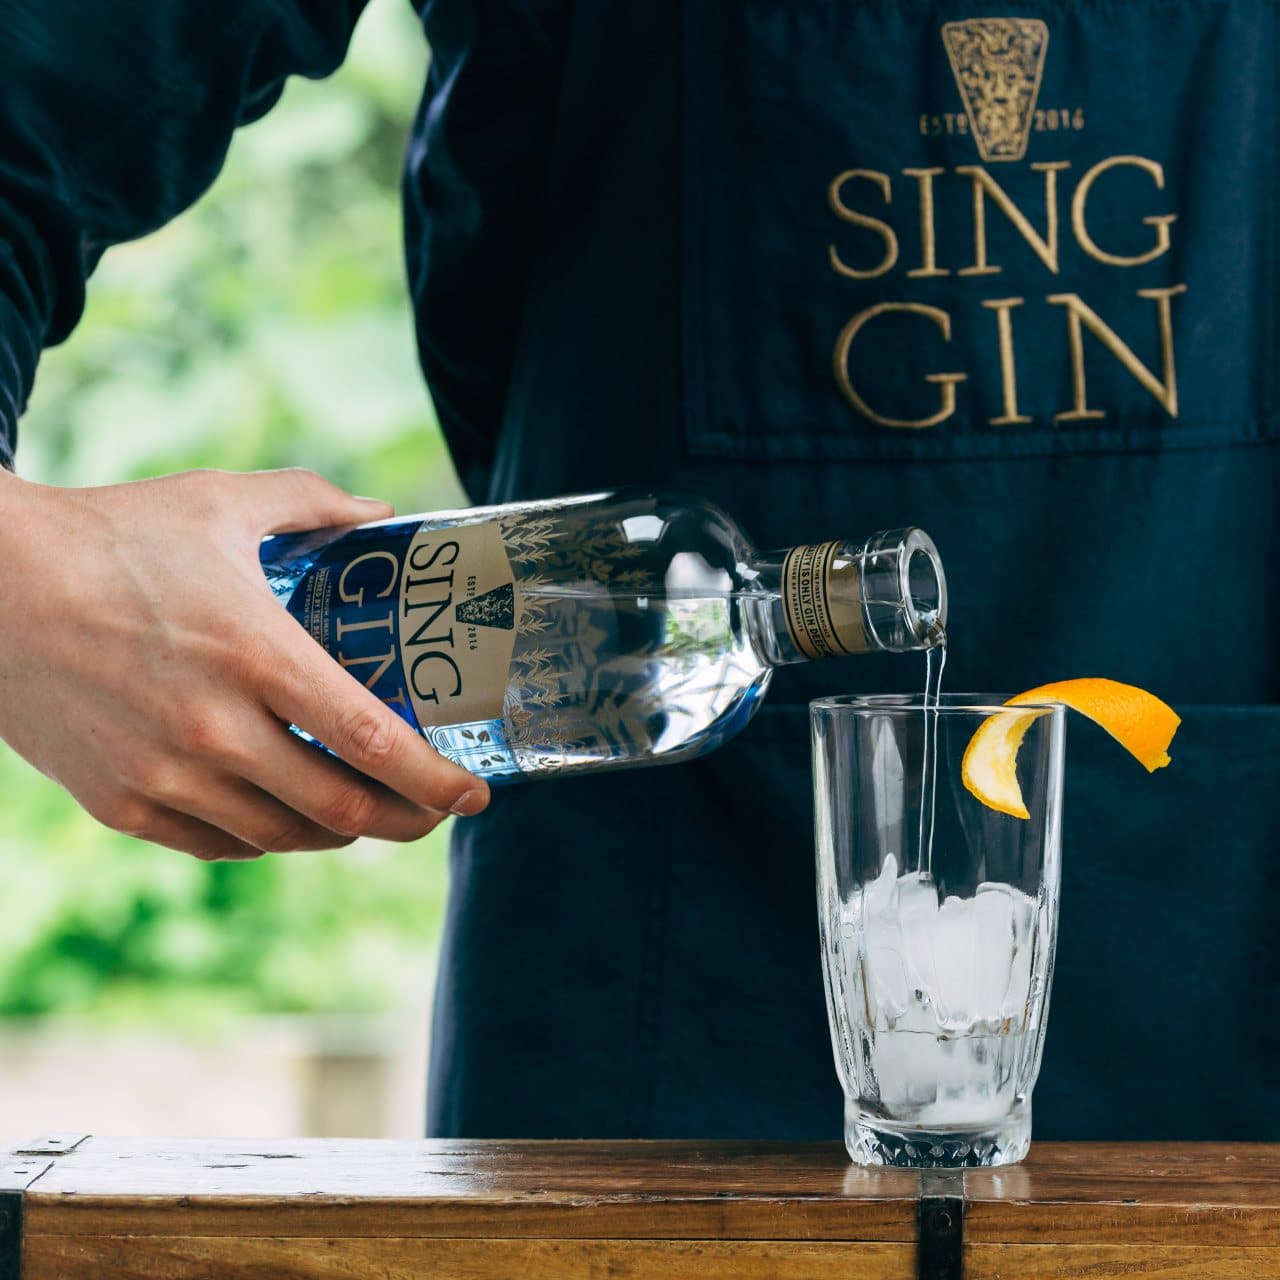 Pouring sing gin into a glass